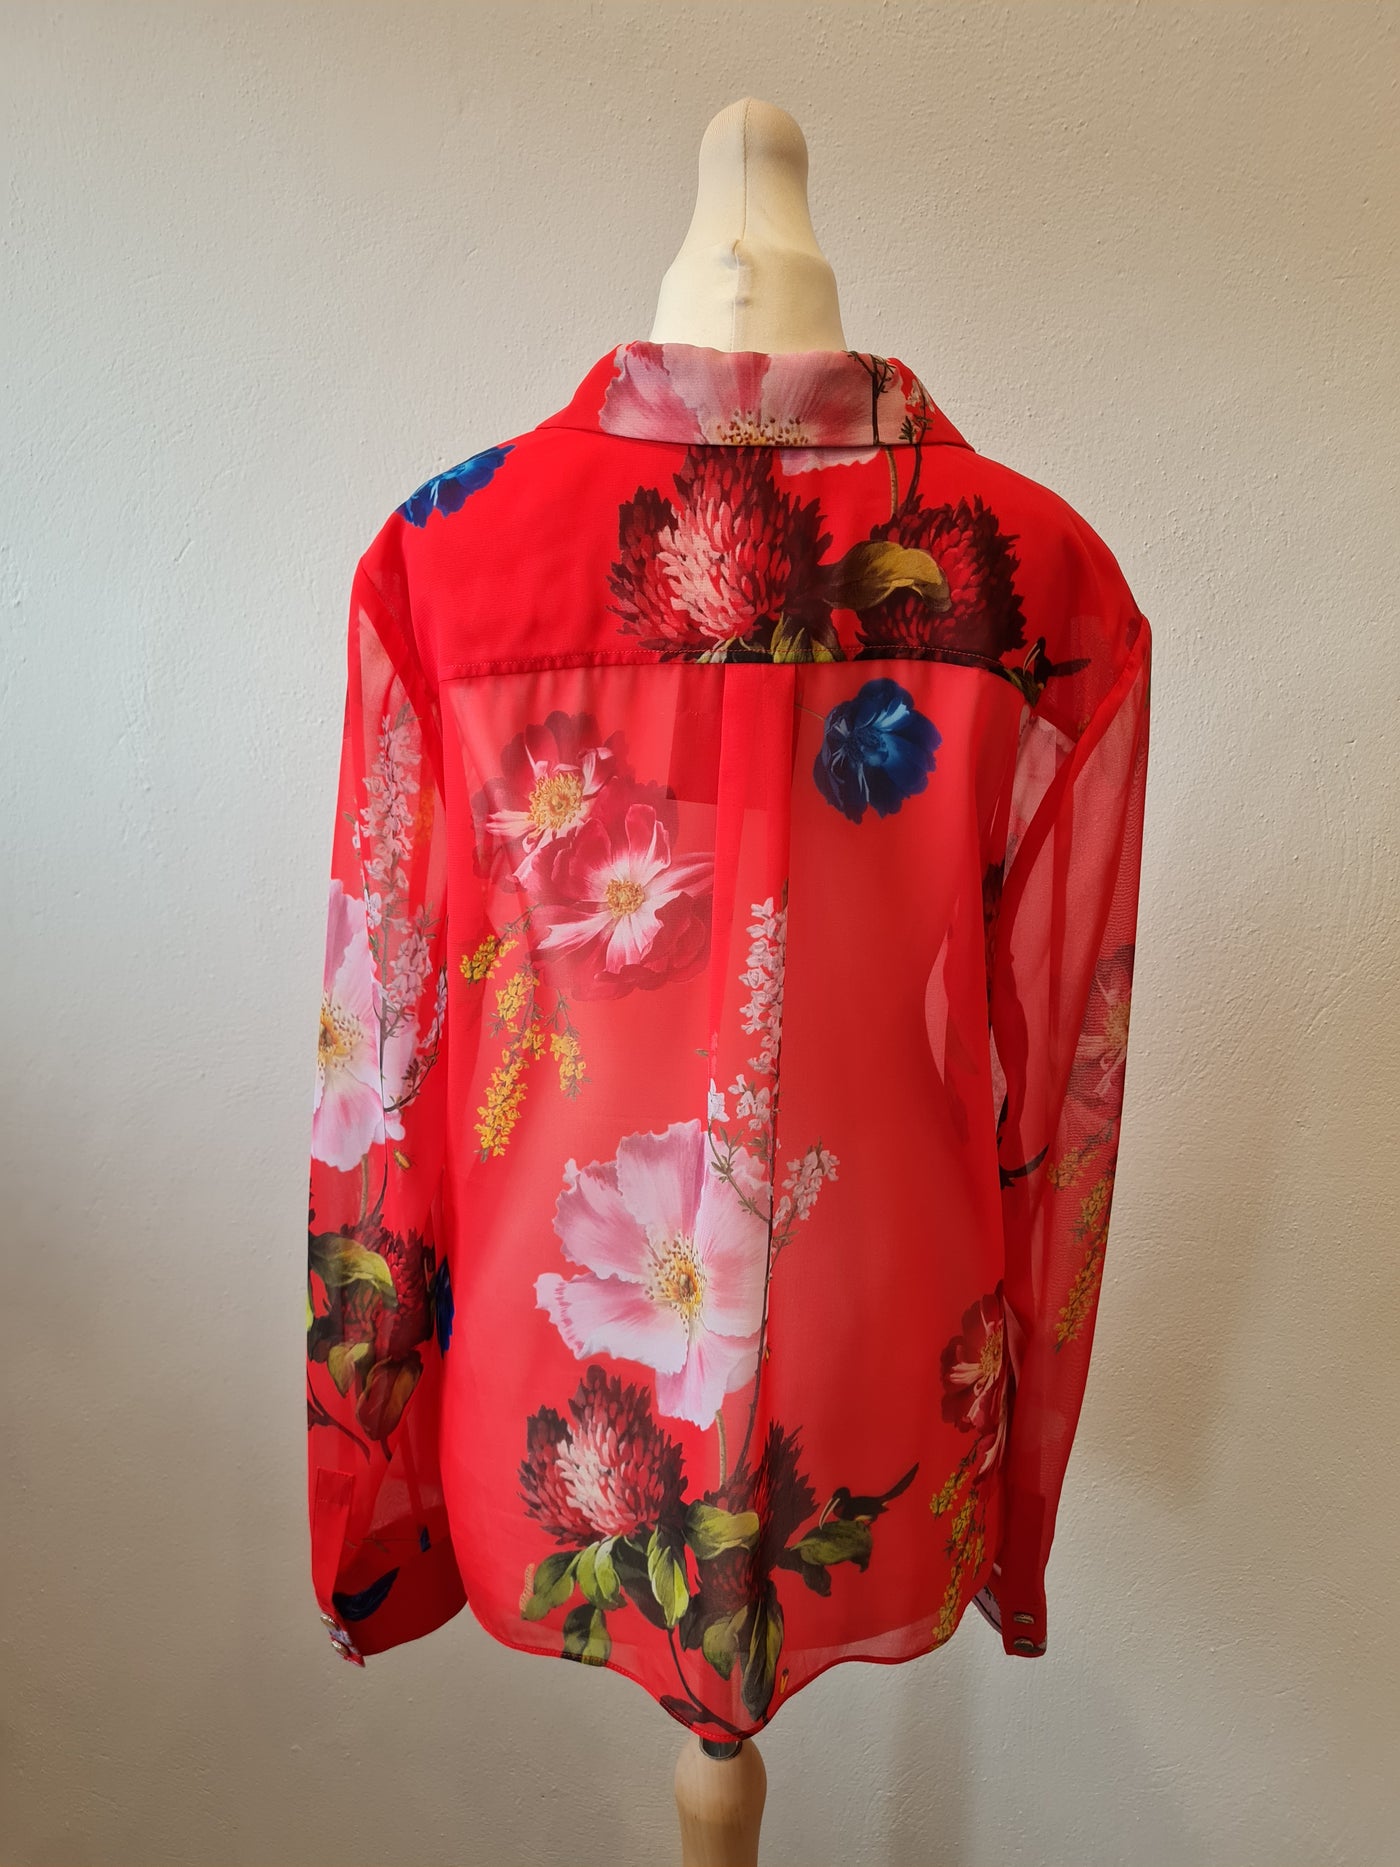 Ted Baker red floral blouse 8/10